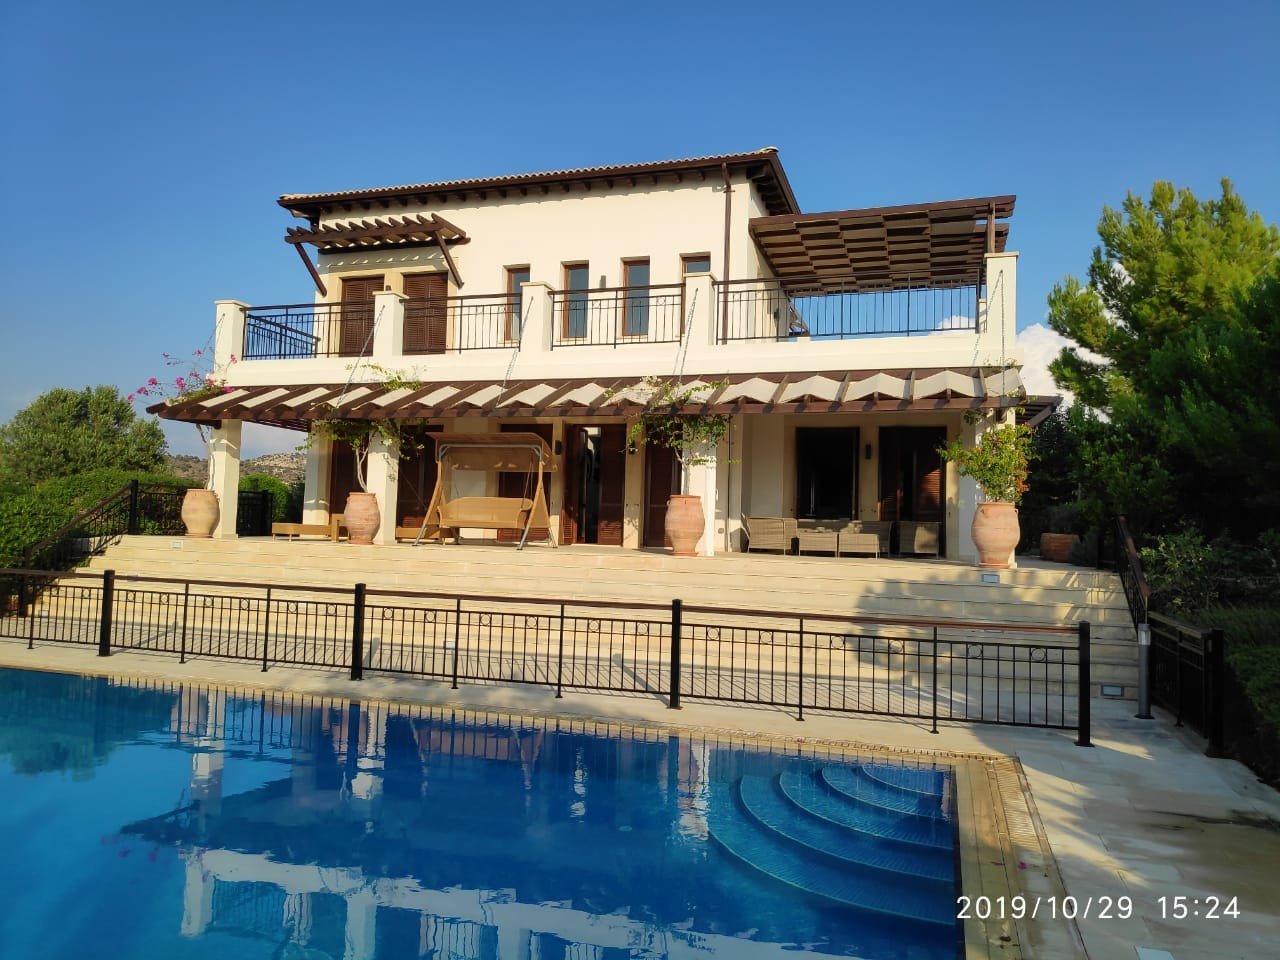 Property for Sale: House (Detached) in Aphrodite Hills, Paphos  | Key Realtor Cyprus